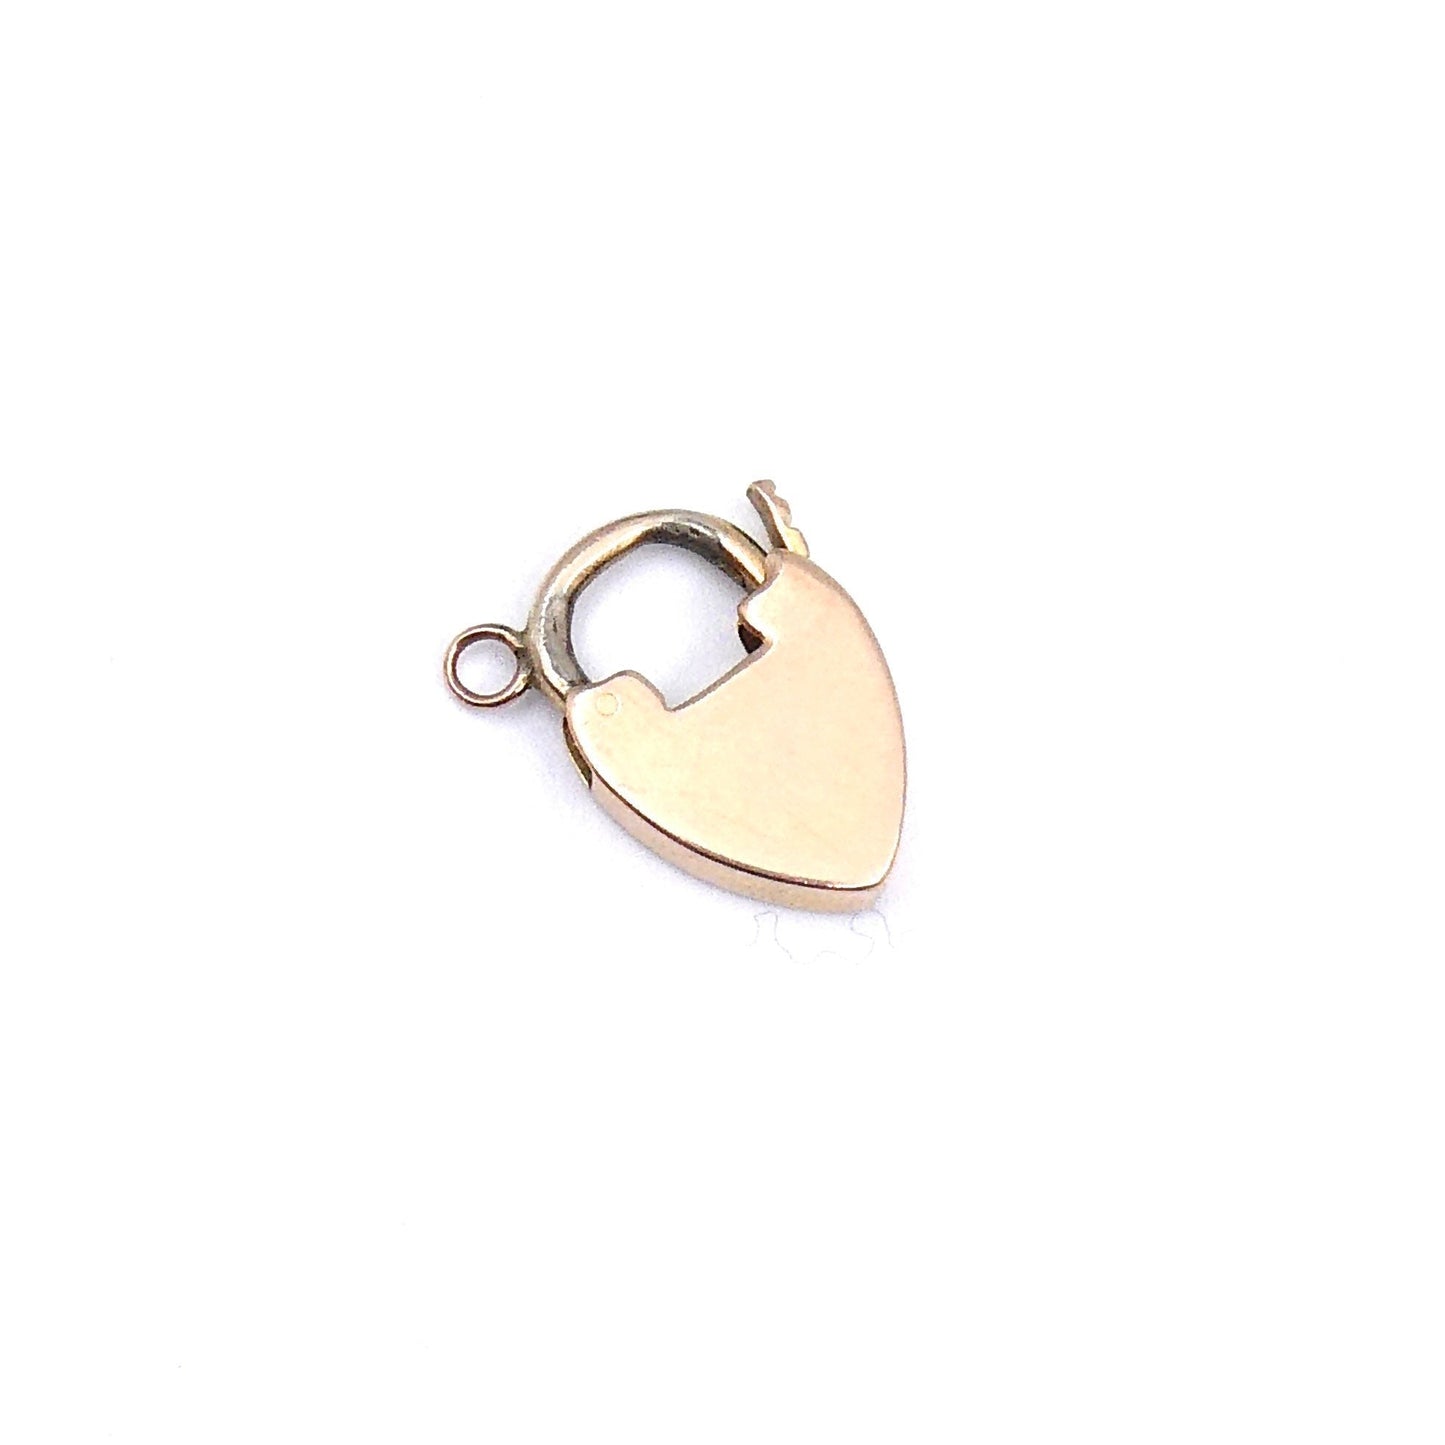 A small vintage 9kt gold padlock with rivets and a ring to hang on a chain, a rose gold toned padlock. - Collected